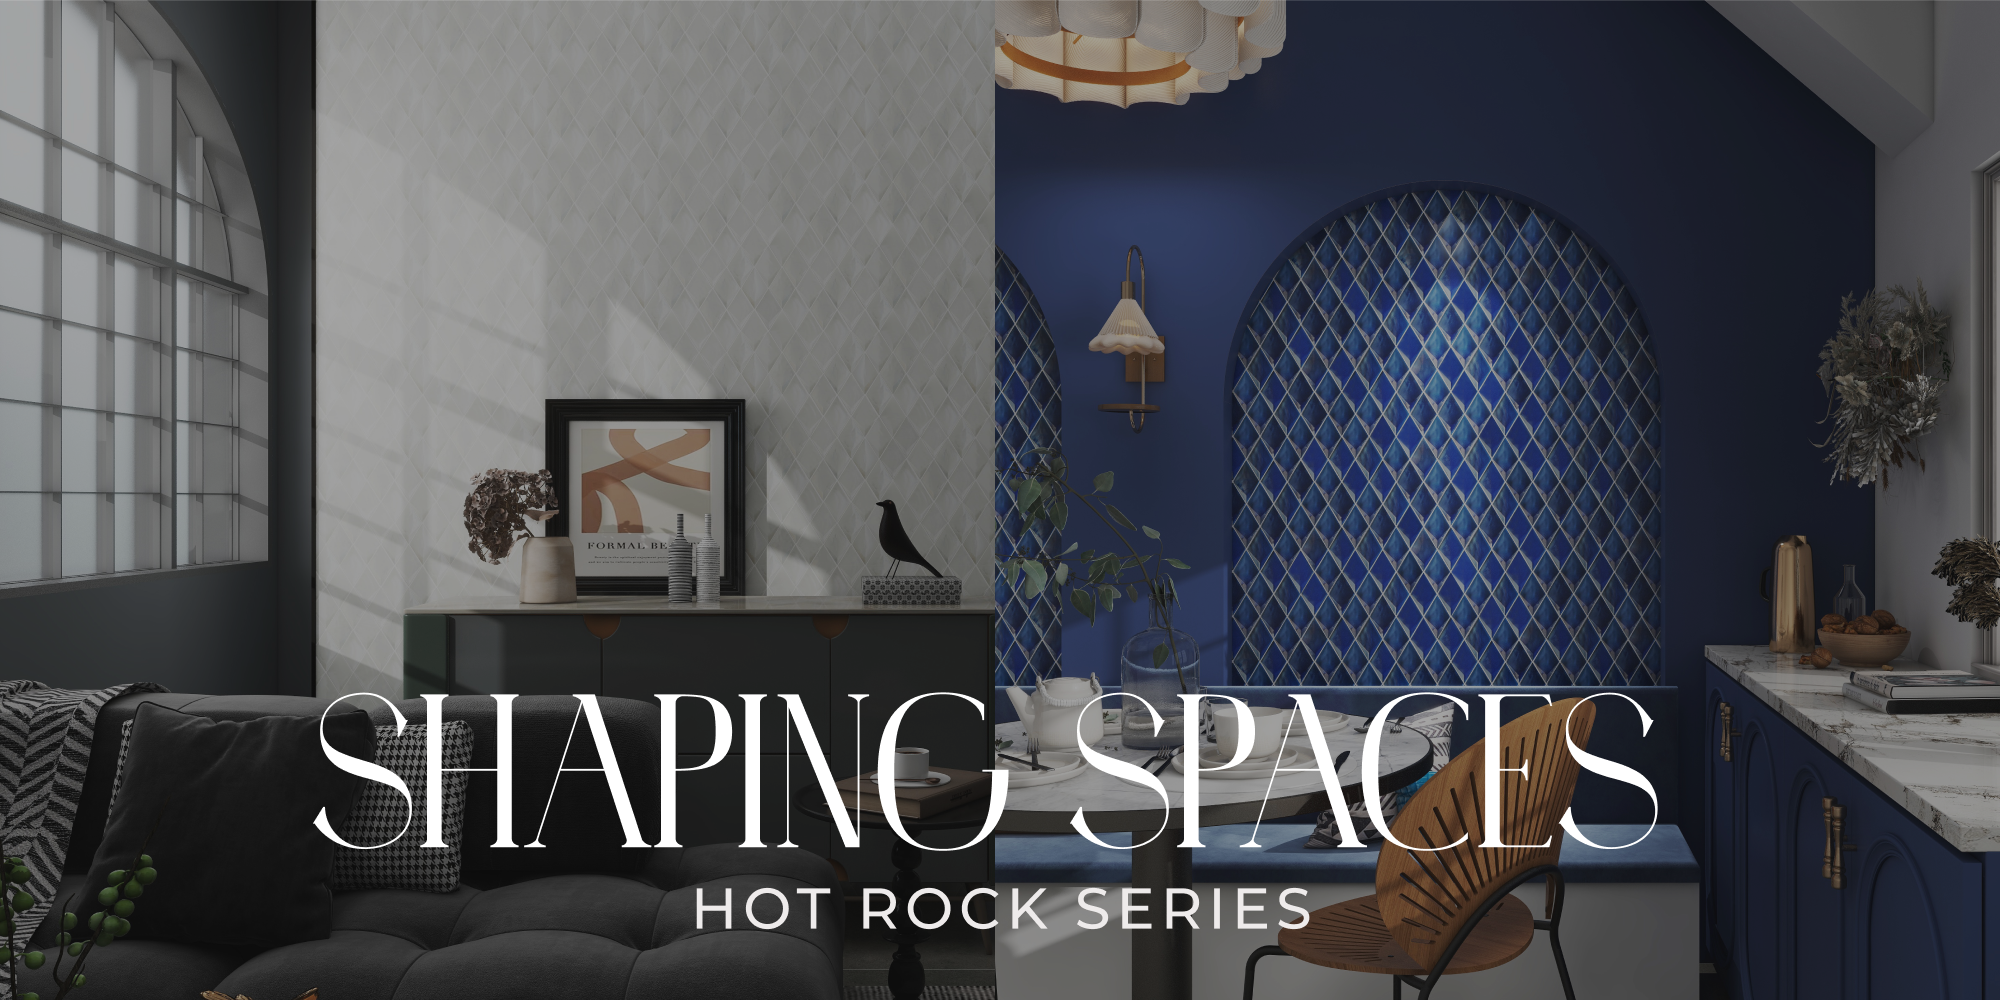 Shaping Spaces - The Artistry of Hot Rock Mosaic Tiles